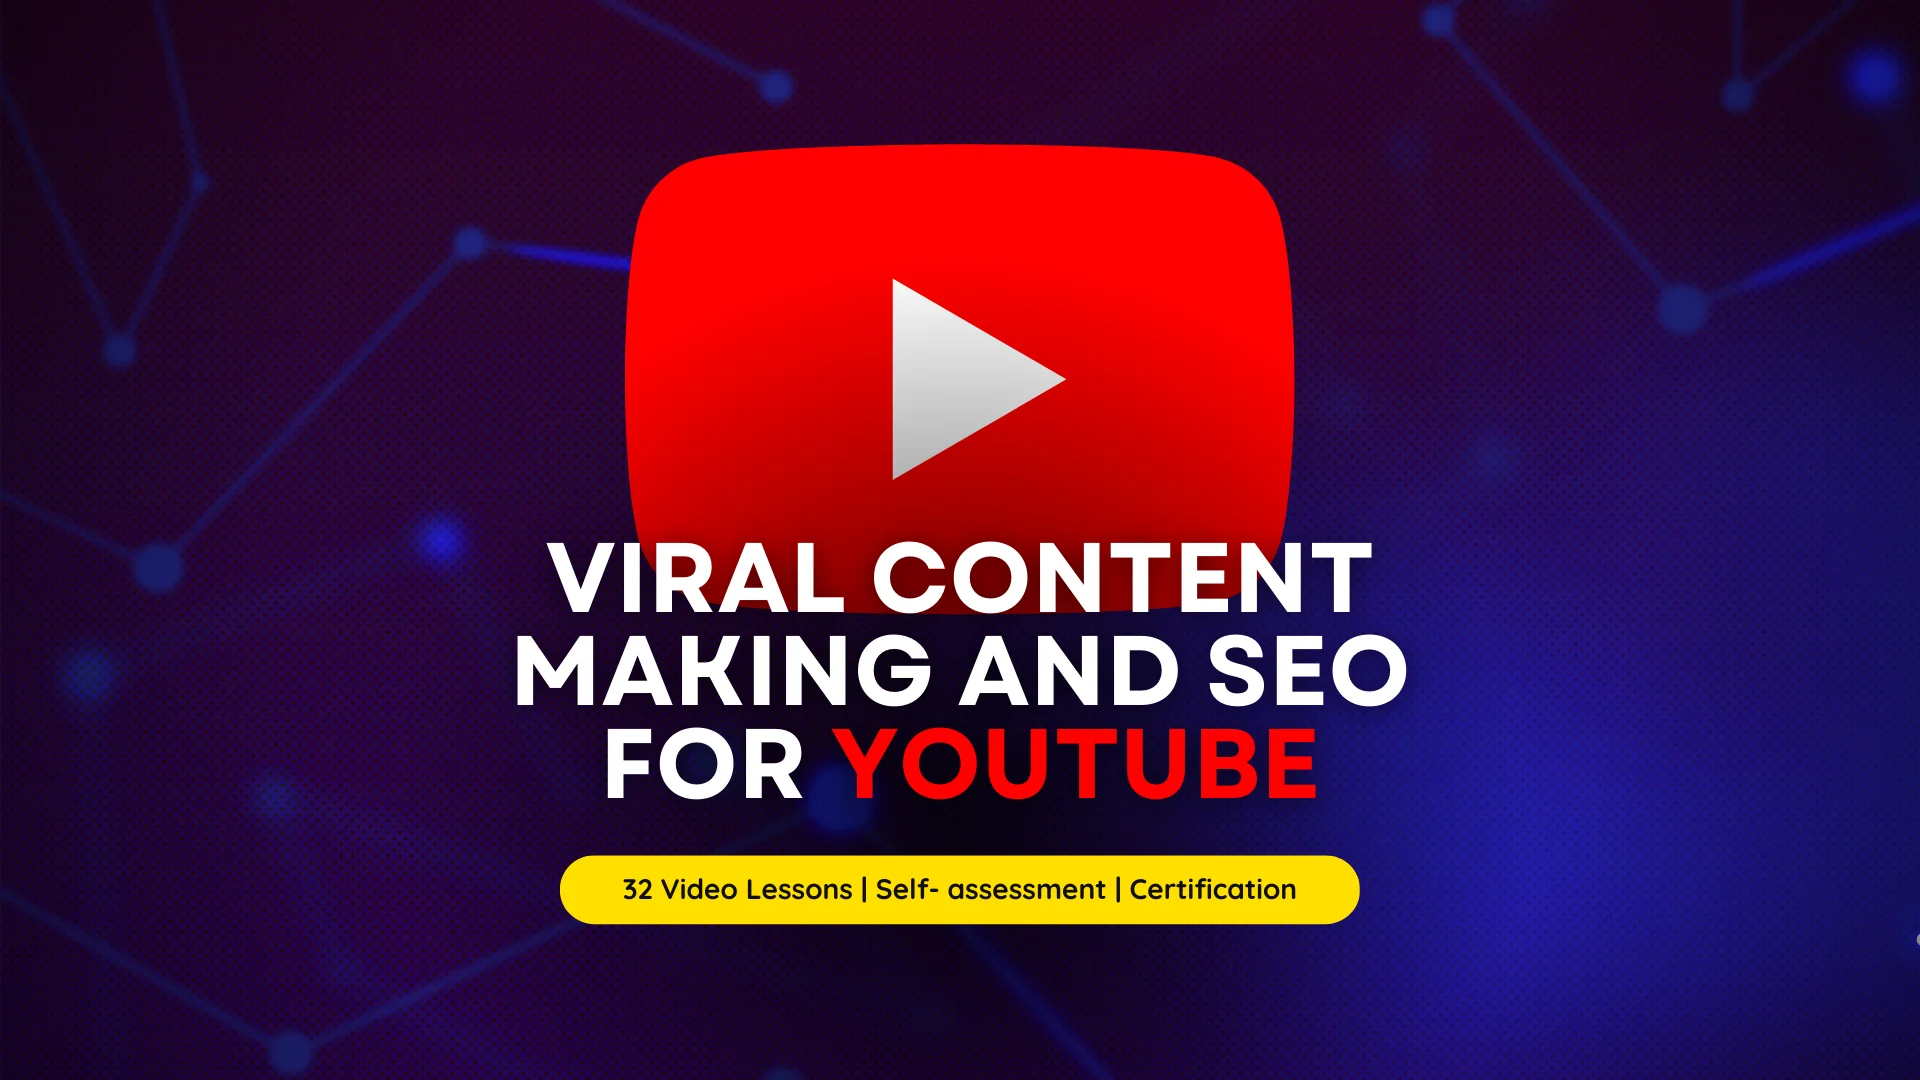 Viral Content Making and SEO for YouTube Course Image